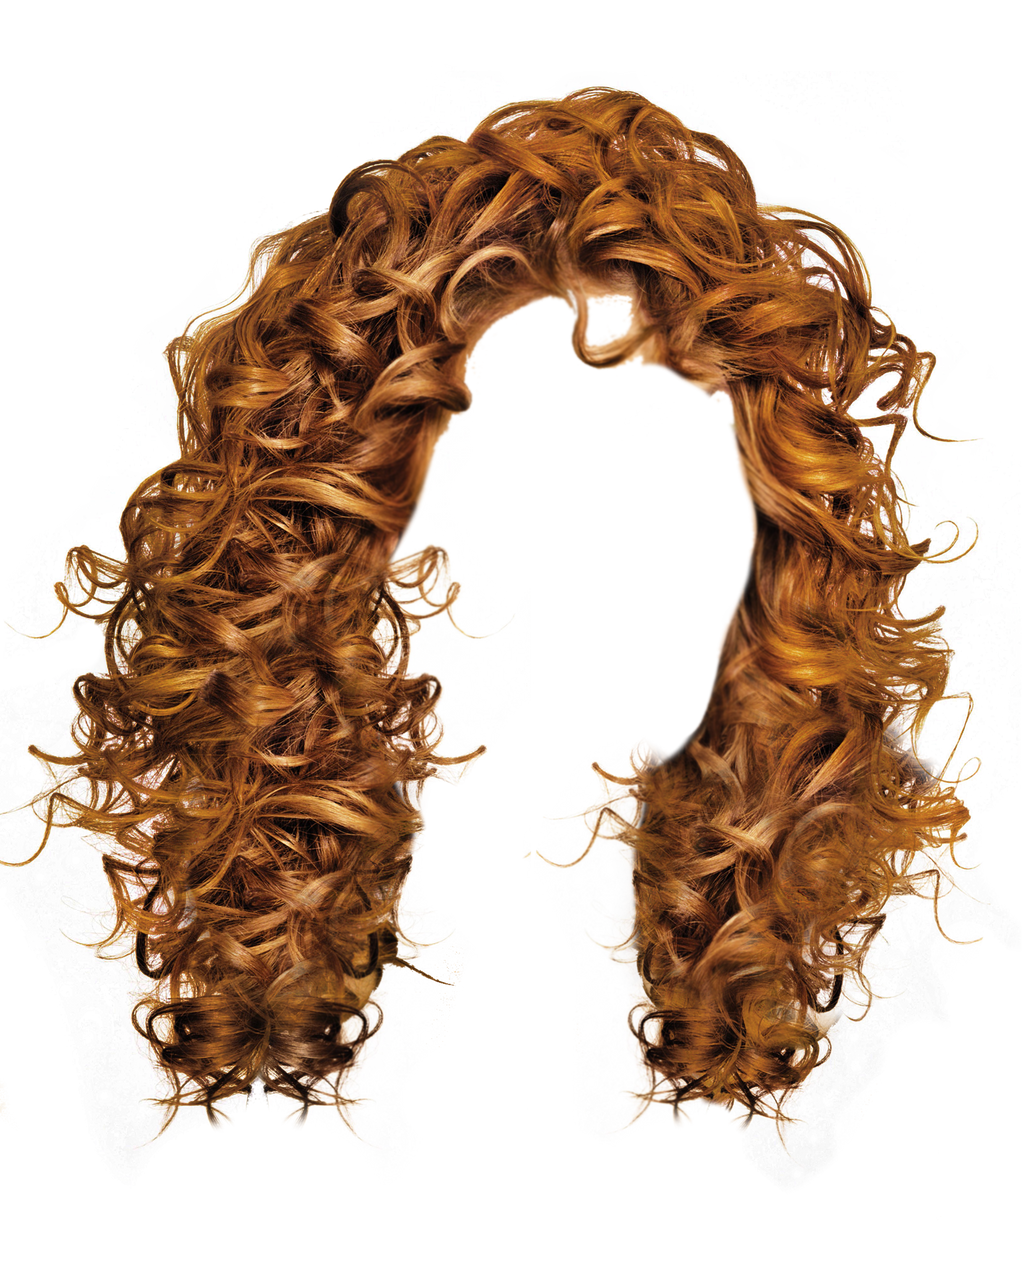 Hair Png 6 by Moonglowlilly on DeviantArt